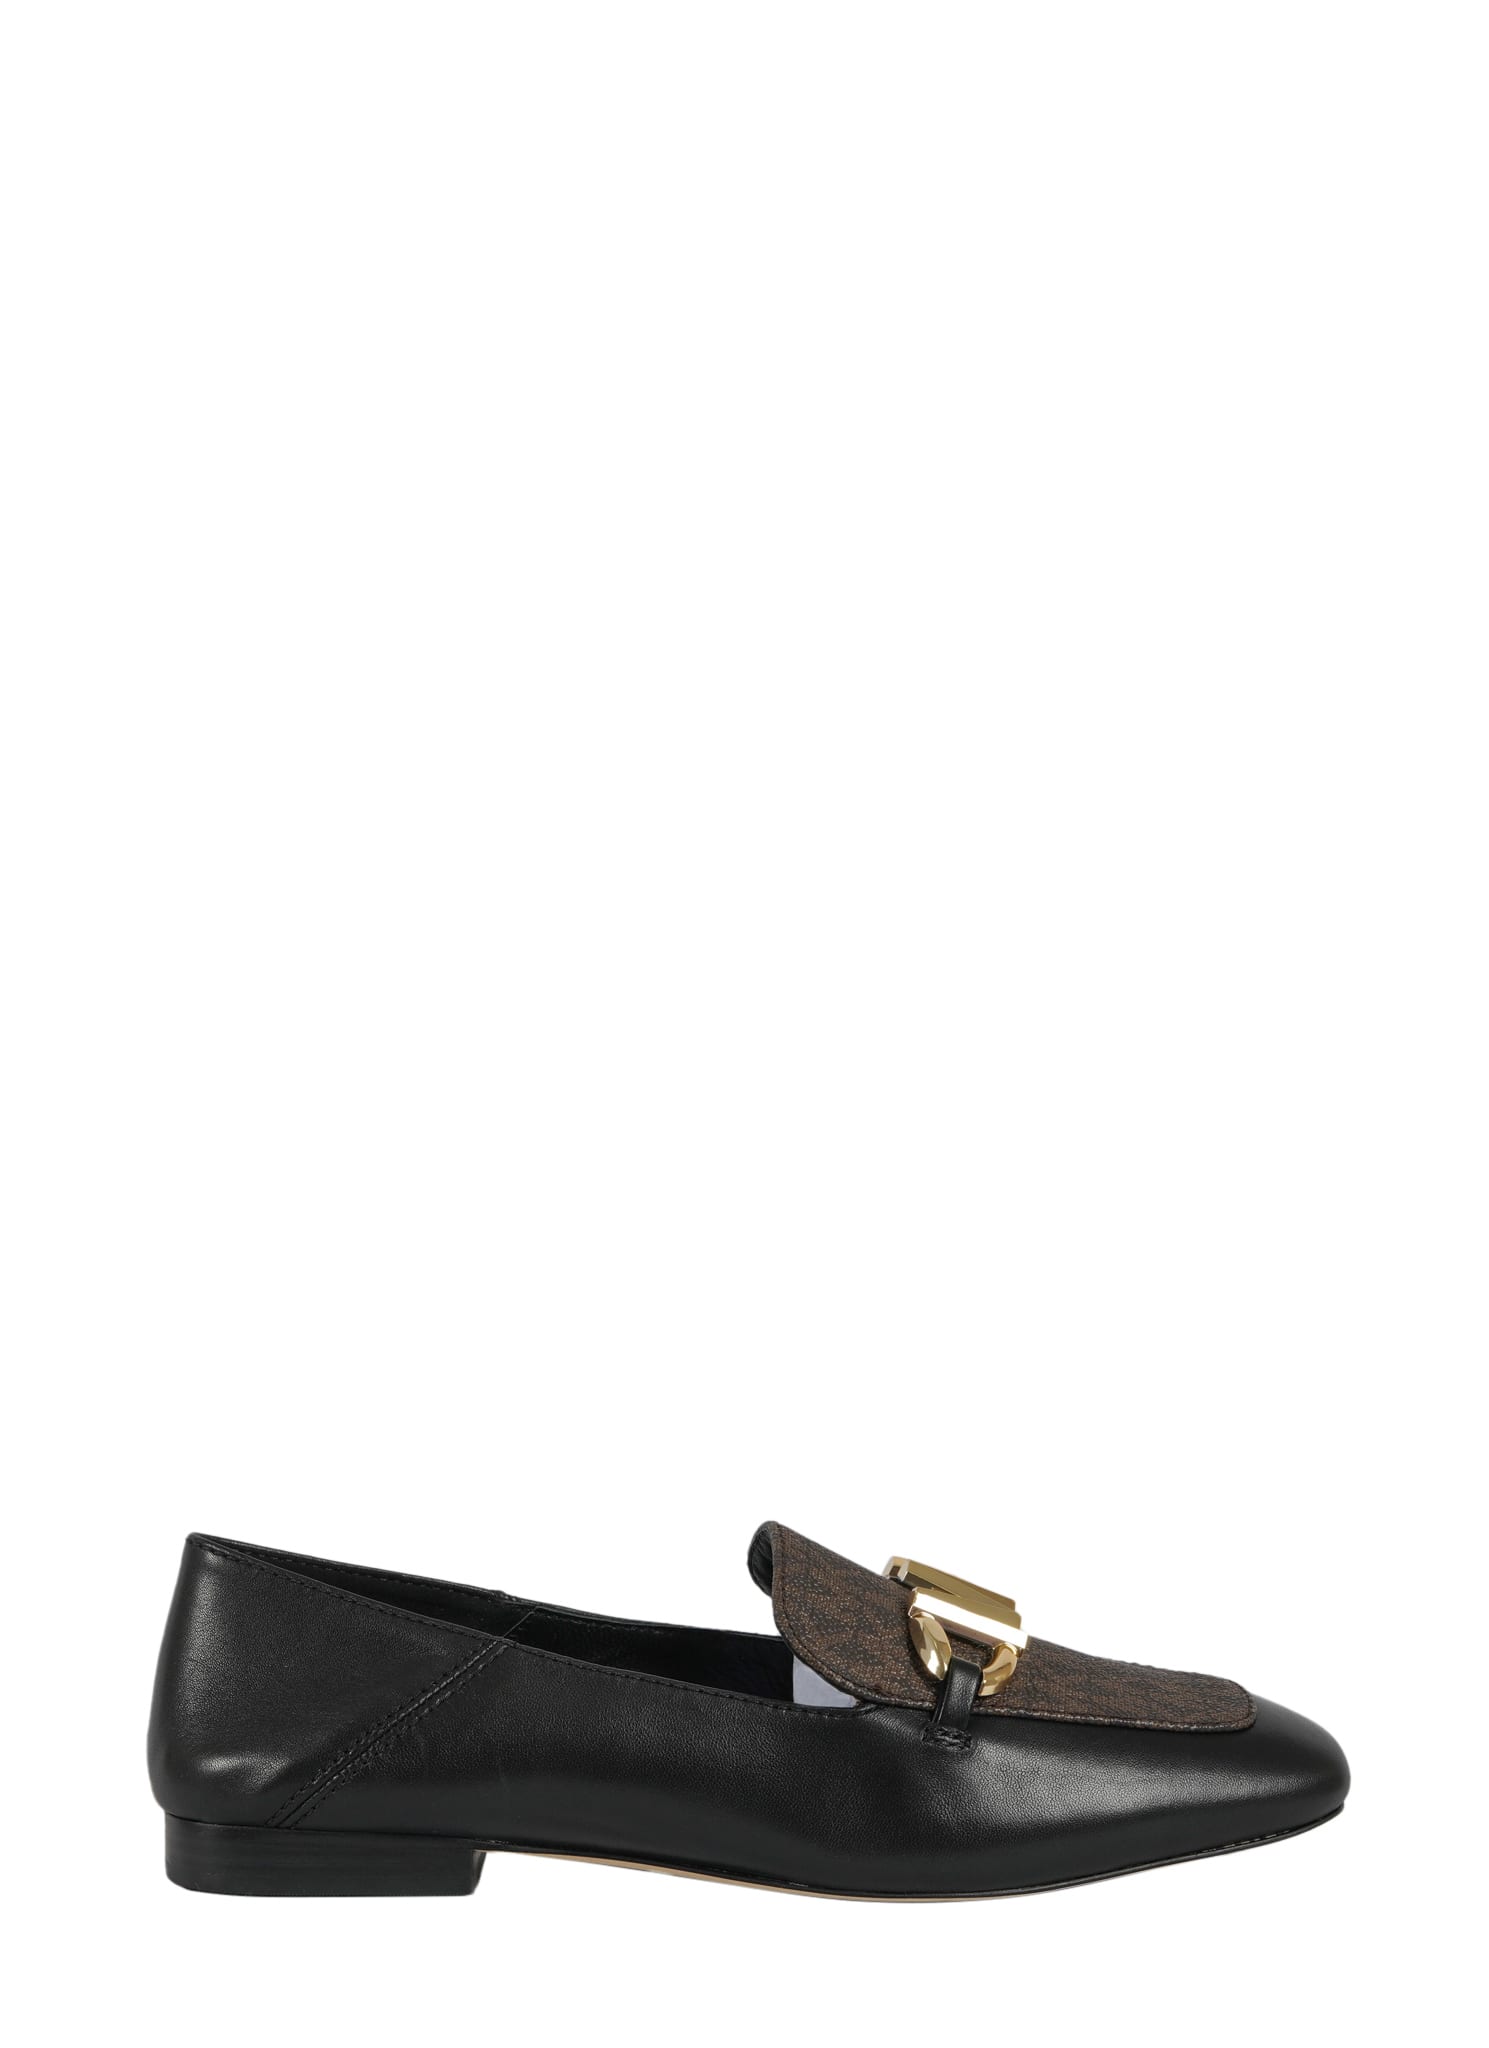 Michael Kors Izzy Loafer Loafers